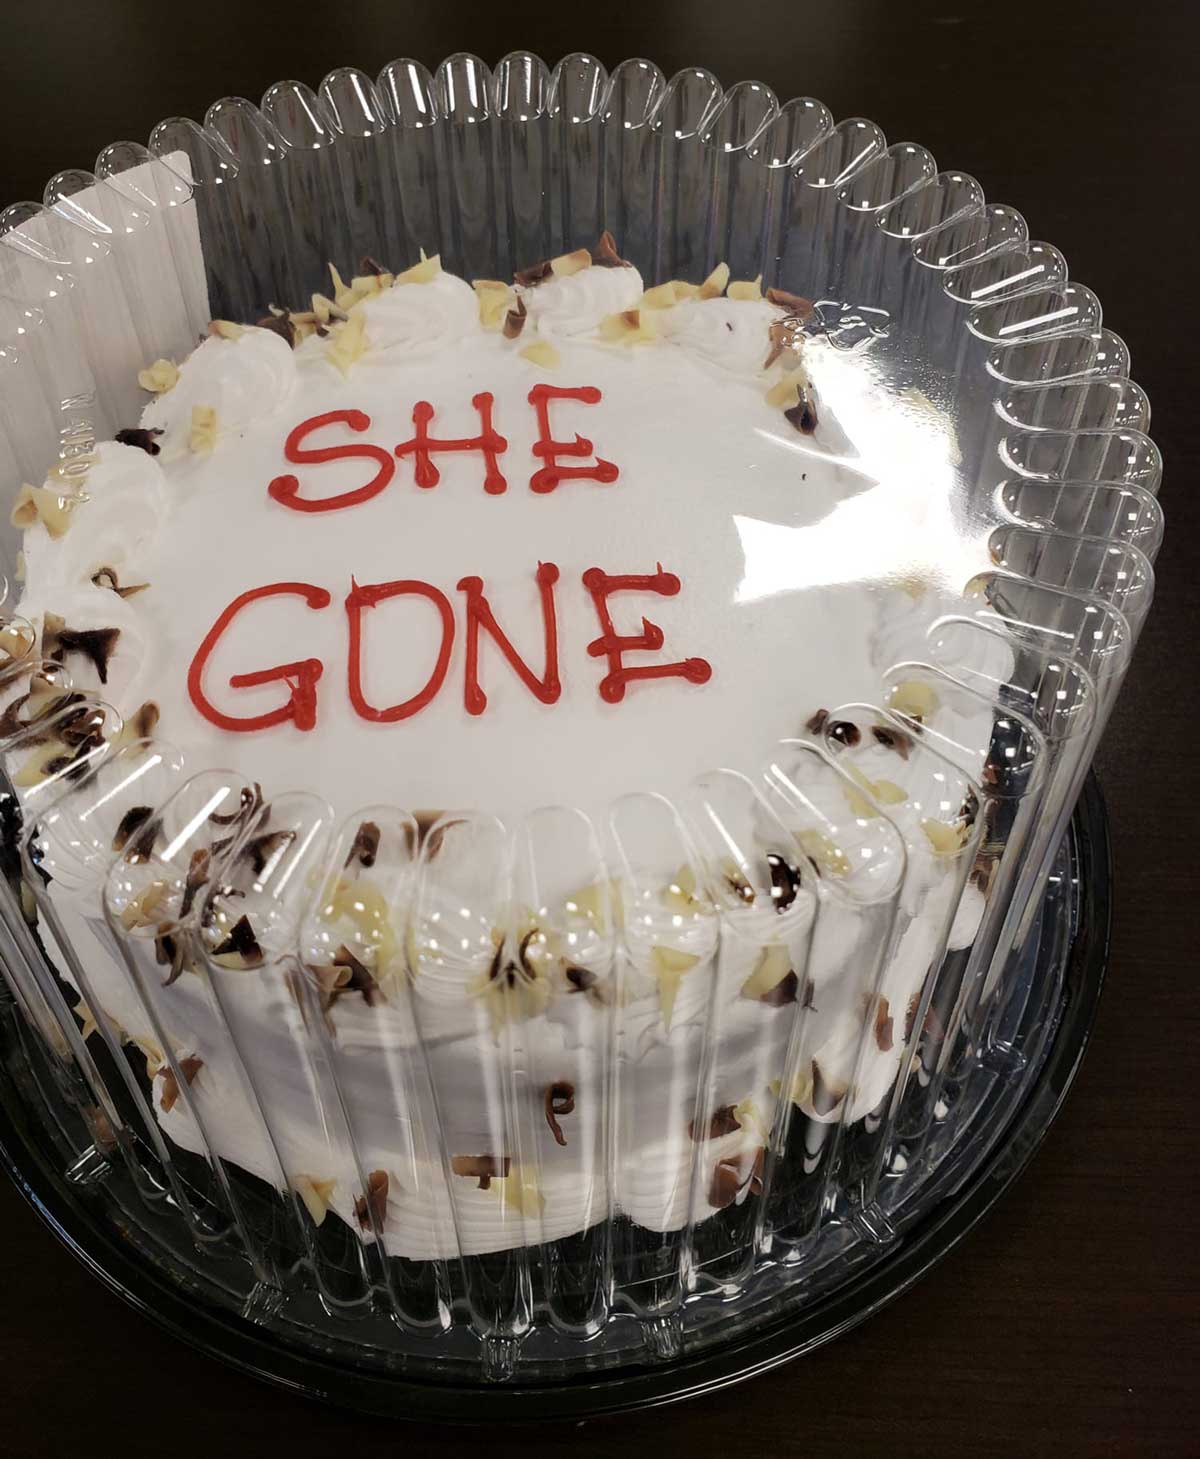 Celebrating my first divorceversary and the office girls bought me a cake